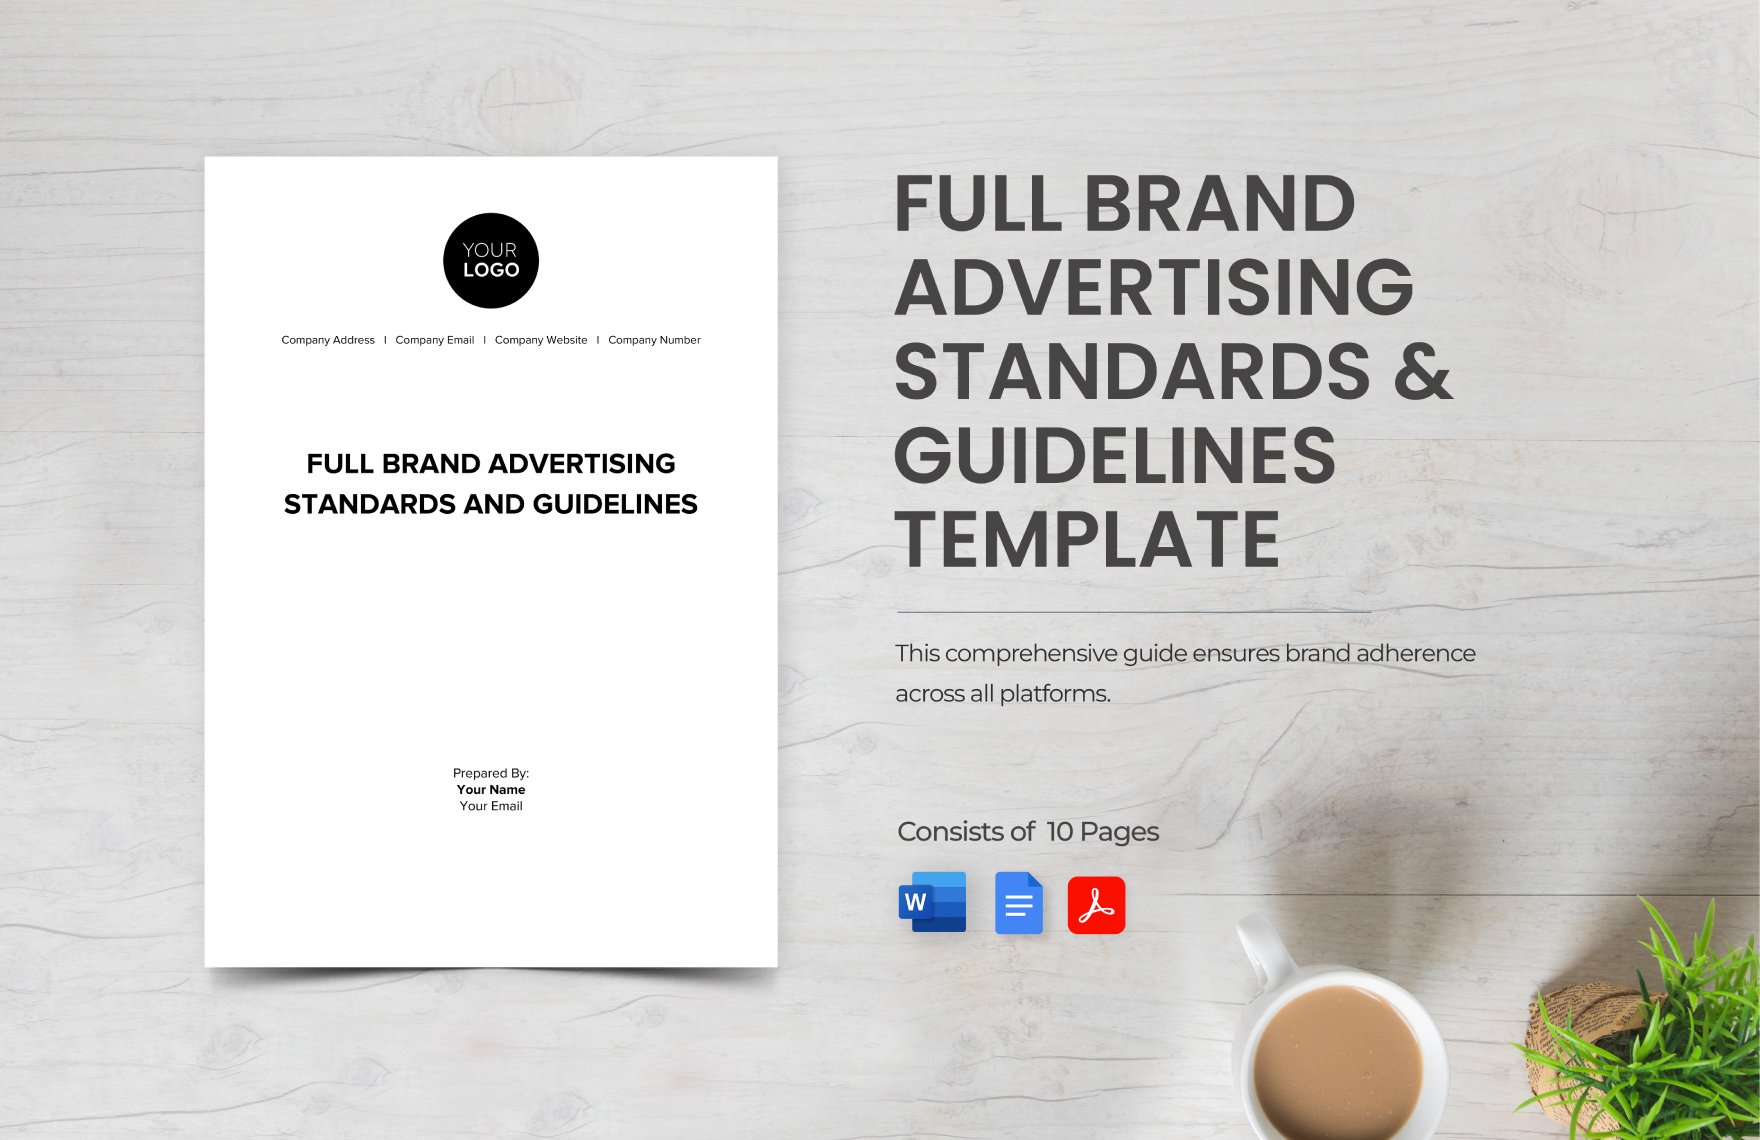 Full Brand Advertising Standards & Guidelines Template in Word, Google Docs, PDF